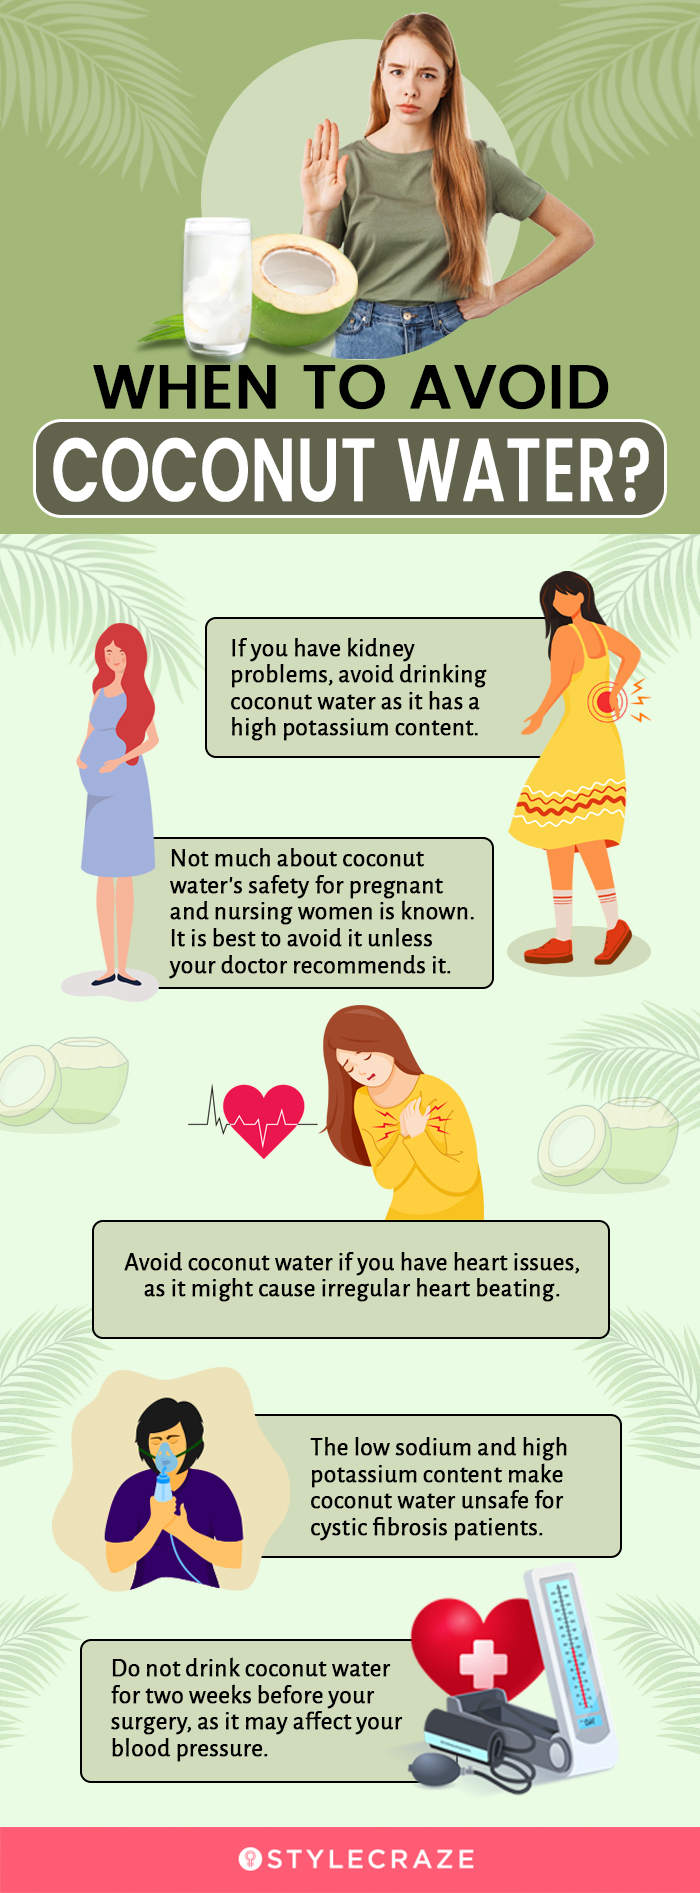 when to avoid coconut water [infographic]